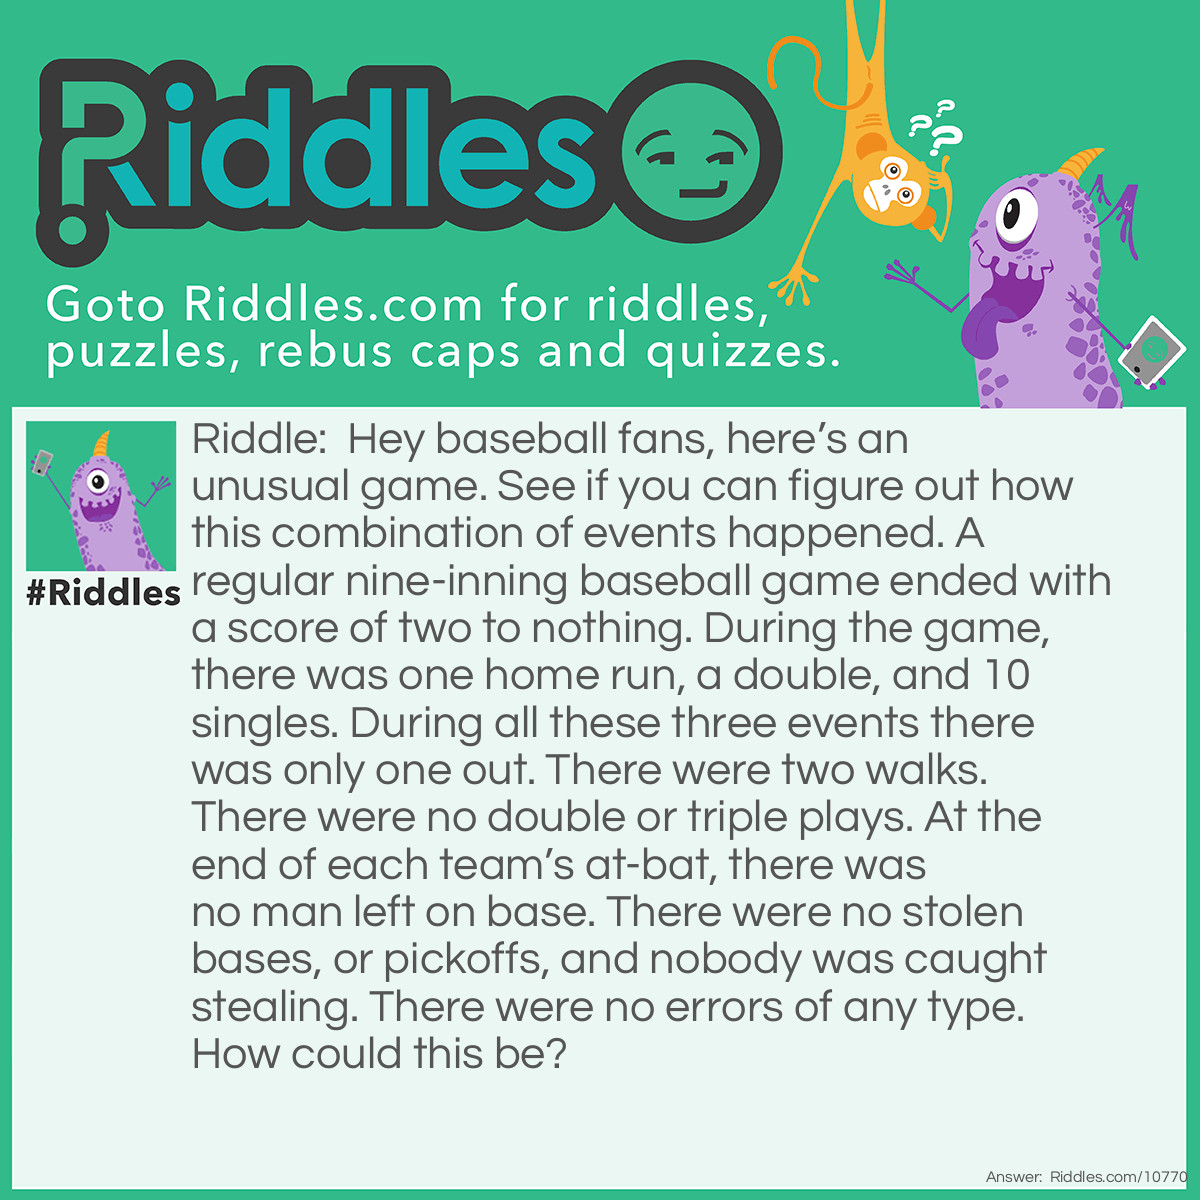 Riddle: Hey baseball fans, here’s an unusual game. See if you can figure out how this combination of events happened. A regular nine-inning baseball game ended with a score of two to nothing. During the game, there was one home run, a double, and 10 singles. During all these three events there was only one out. There were two walks. There were no double or triple plays. At the end of each team’s at-bat, there was no man left on base. There were no stolen bases, or pickoffs, and nobody was caught stealing. There were no errors of any type. How could this be? Answer: It was a woman’s baseball game.